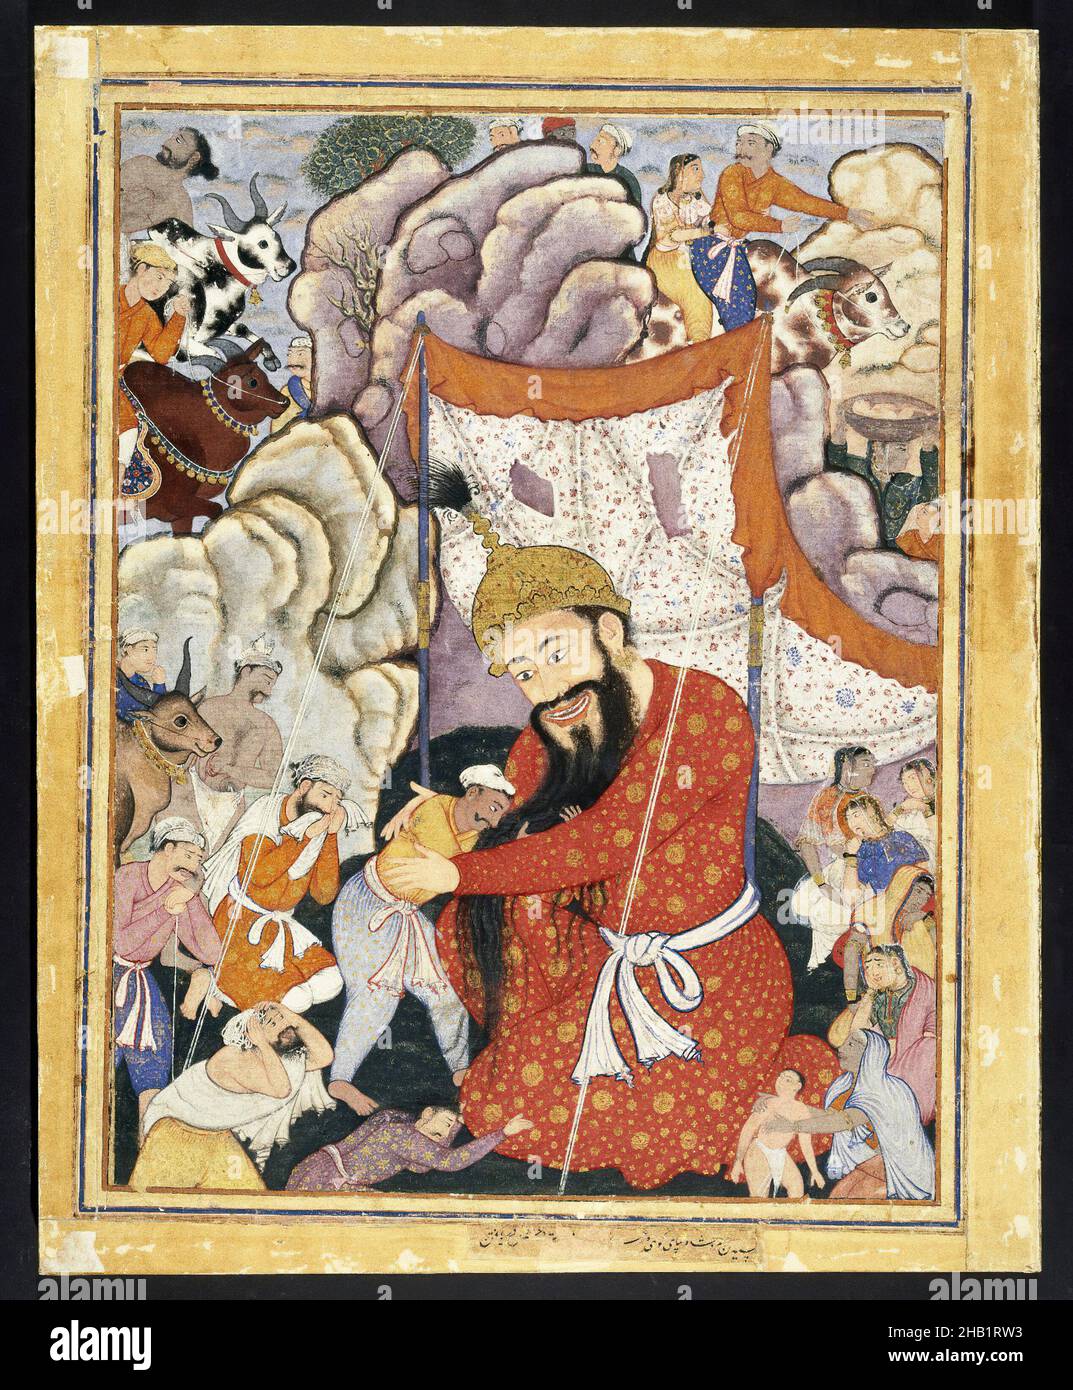 Zumurrud Shah Takes Refuge in the Mountains, Indian, Opaque watercolor and gold on cotton cloth, India, ca. 1570, Mughal, sheet: 31 x 25 in., 78.7 x 63.5 cm, 16thC, akbar, Akbar Period, Arabic, Asian art, canopy, central asian, cloth, colorful, cotton, decoration, decorative, epic, fabric, Folio, Gold, Hamzanama, hierarchical scale, IMLS, India, Indian Art, king, Middle Eastern art, mountain, Mughal, narrative, opaque watercolor, Opaque watercolor and gold on cotton cloth, portrait, tent, watercolor, Zumurrud Shah Stock Photo